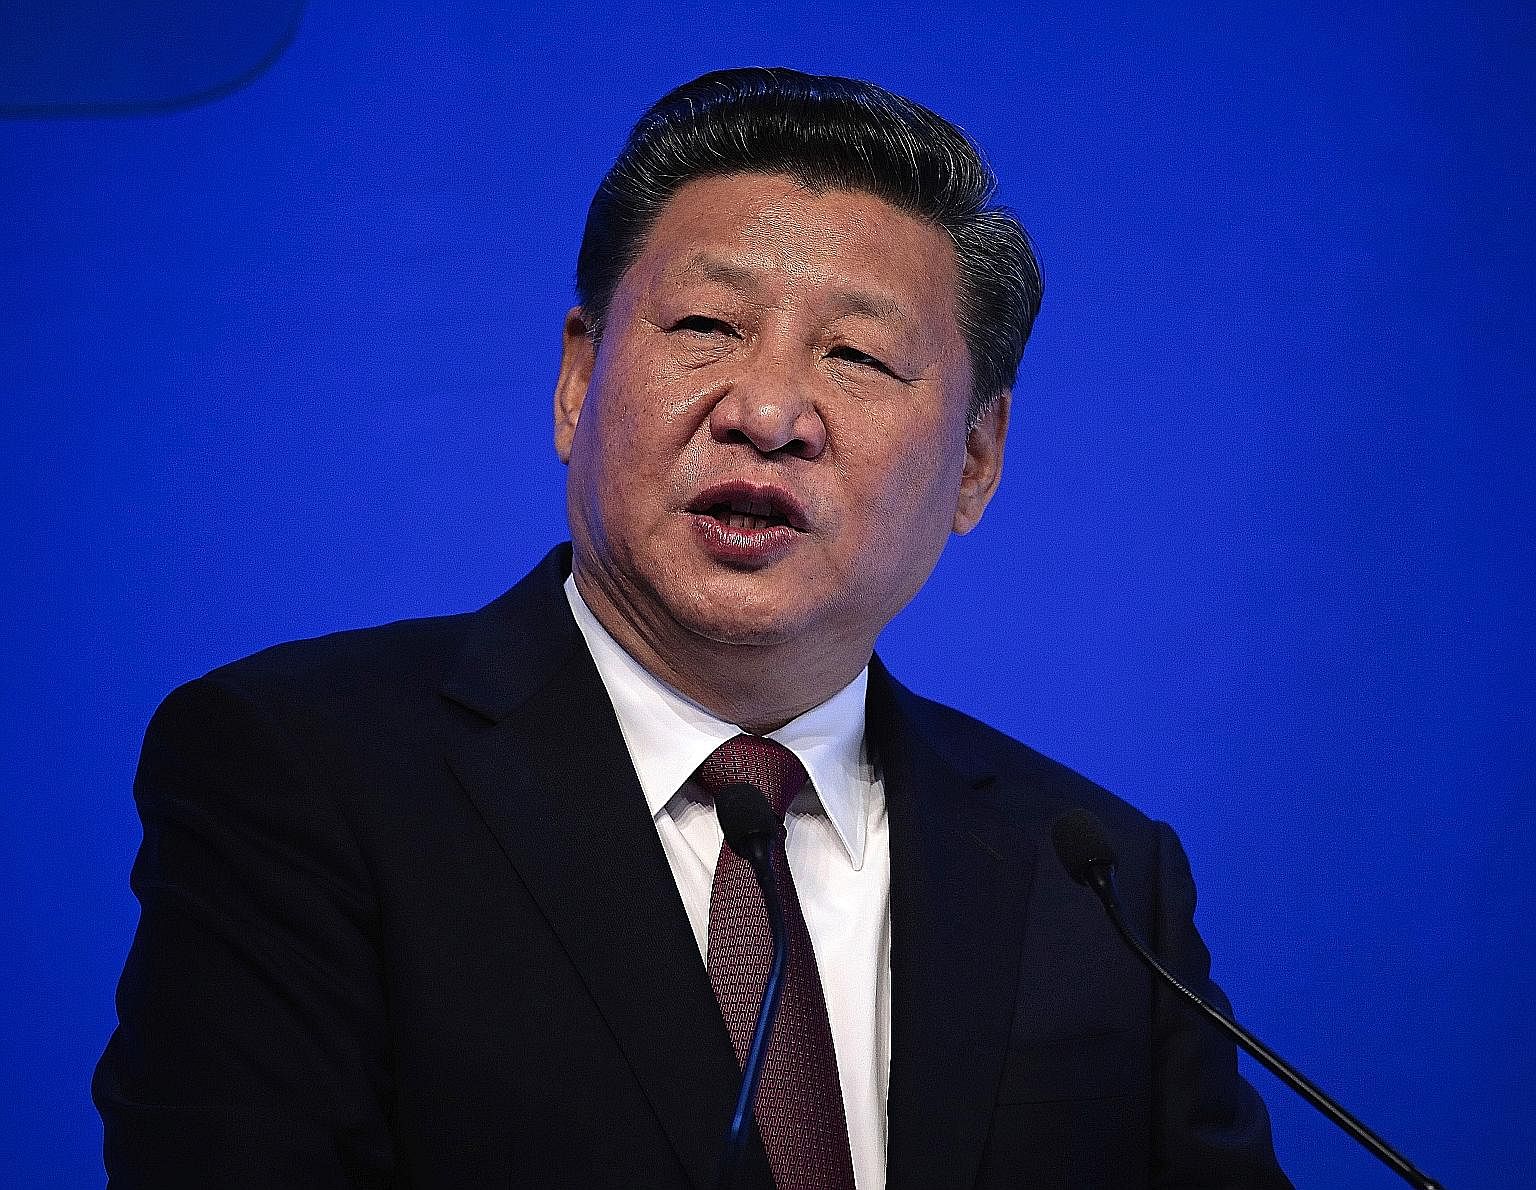 Last week, speaking at the Davos forum, Mr Xi recommitted China to globalisation and free trade.